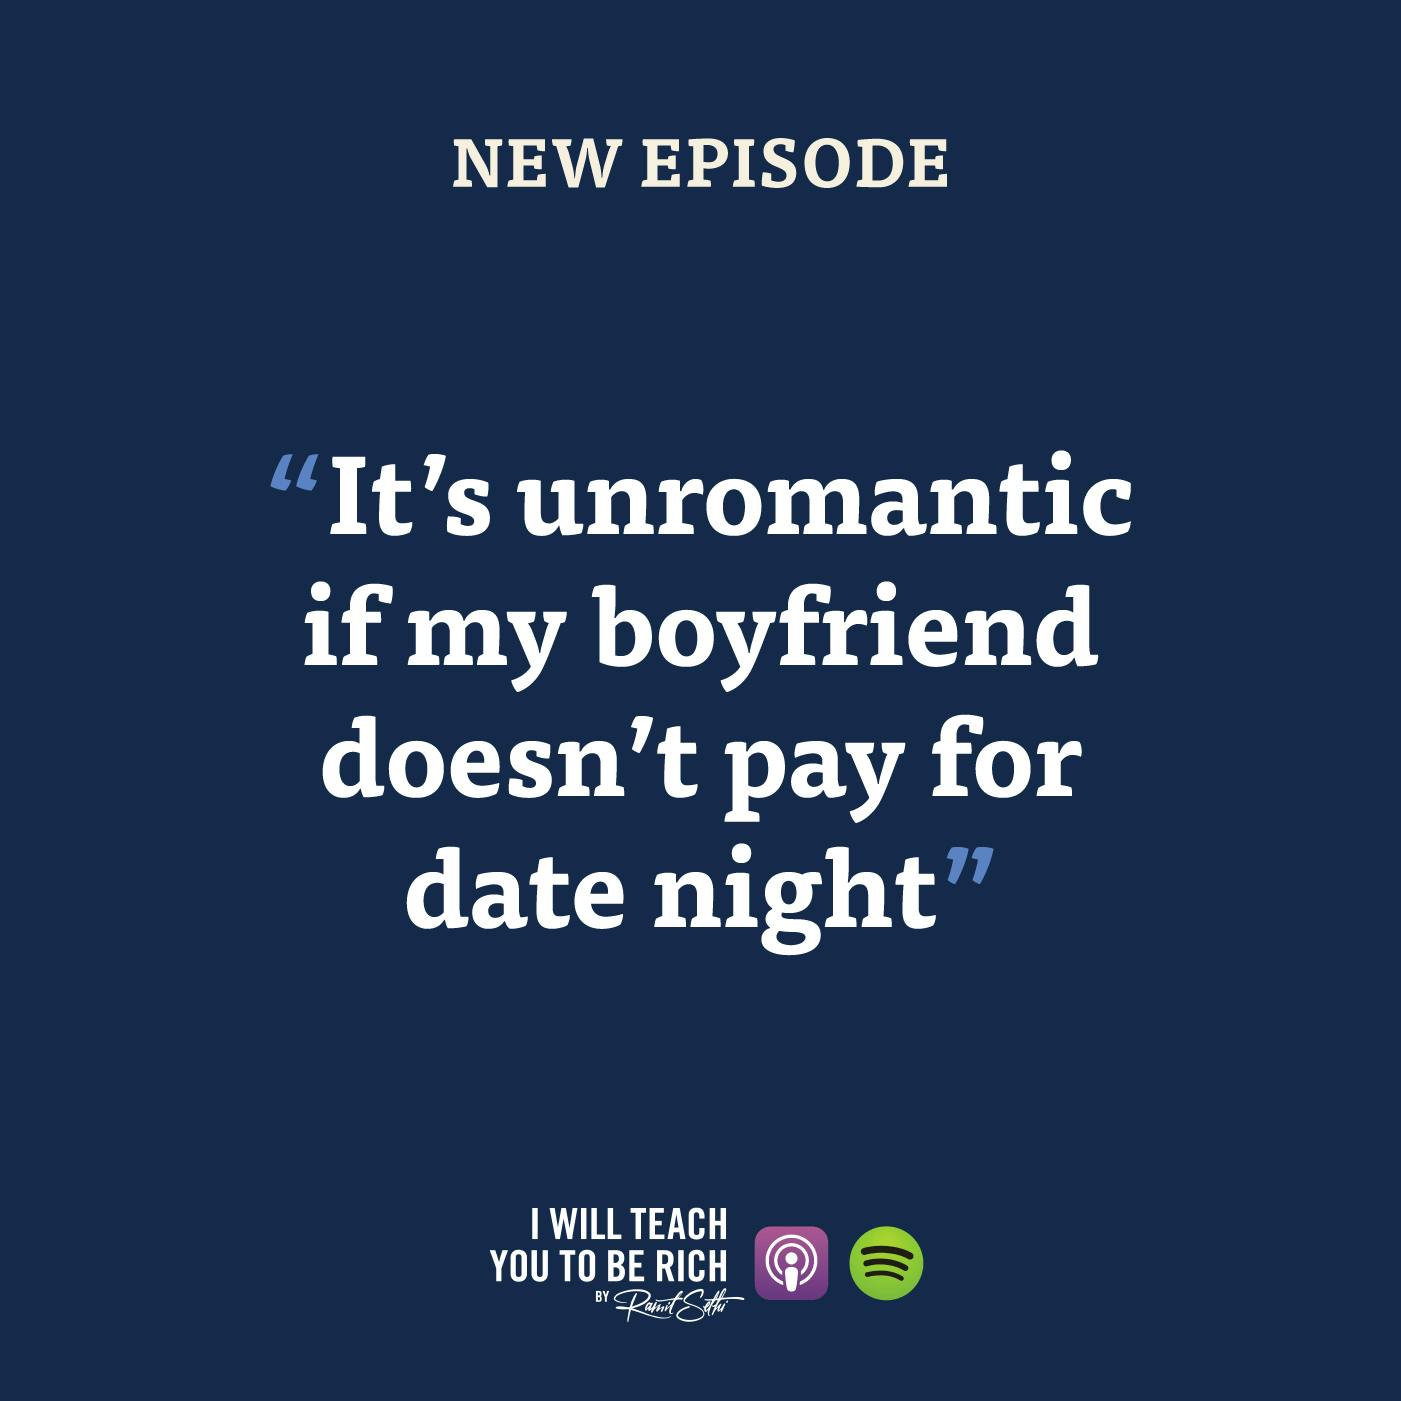 34. “It’s unromantic if my boyfriend doesn’t pay for date night”